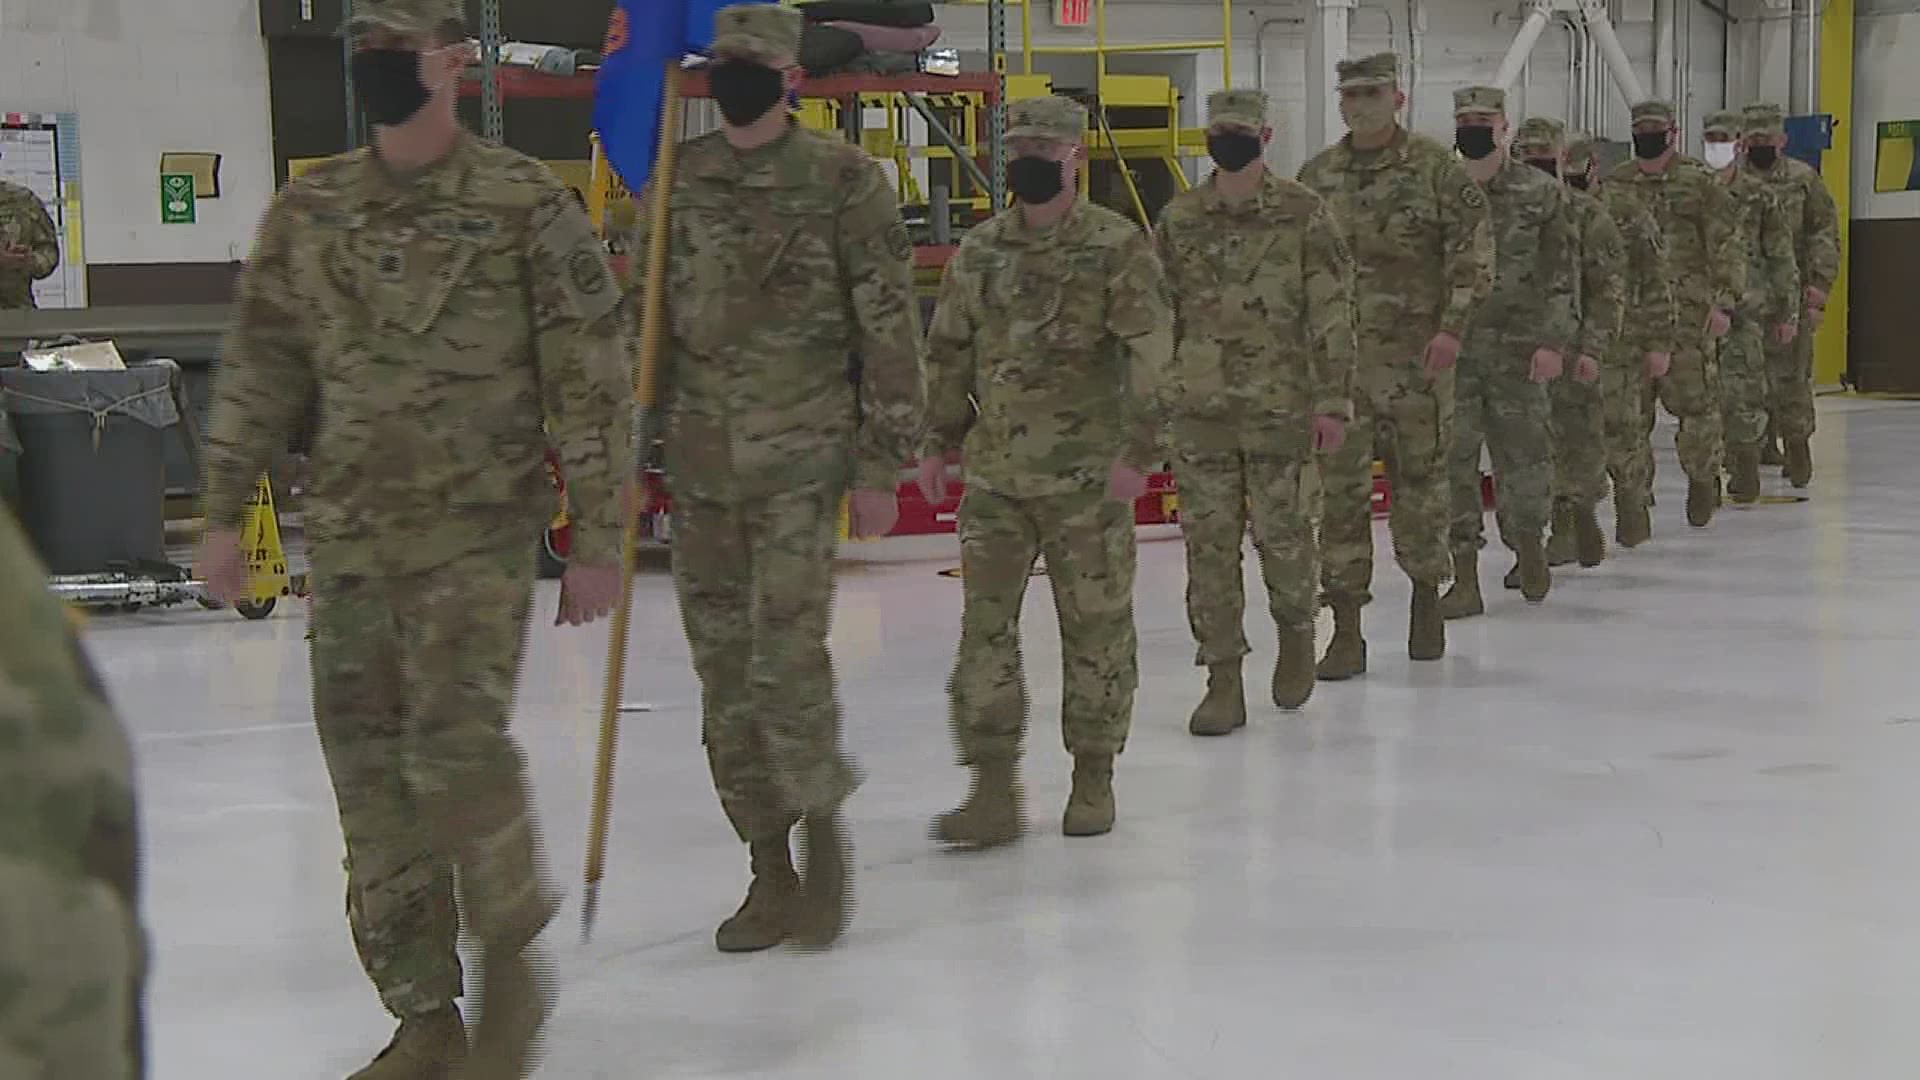 75 Iowa National Guard soldiers prep for deployment with send-off ceremony in Davenport